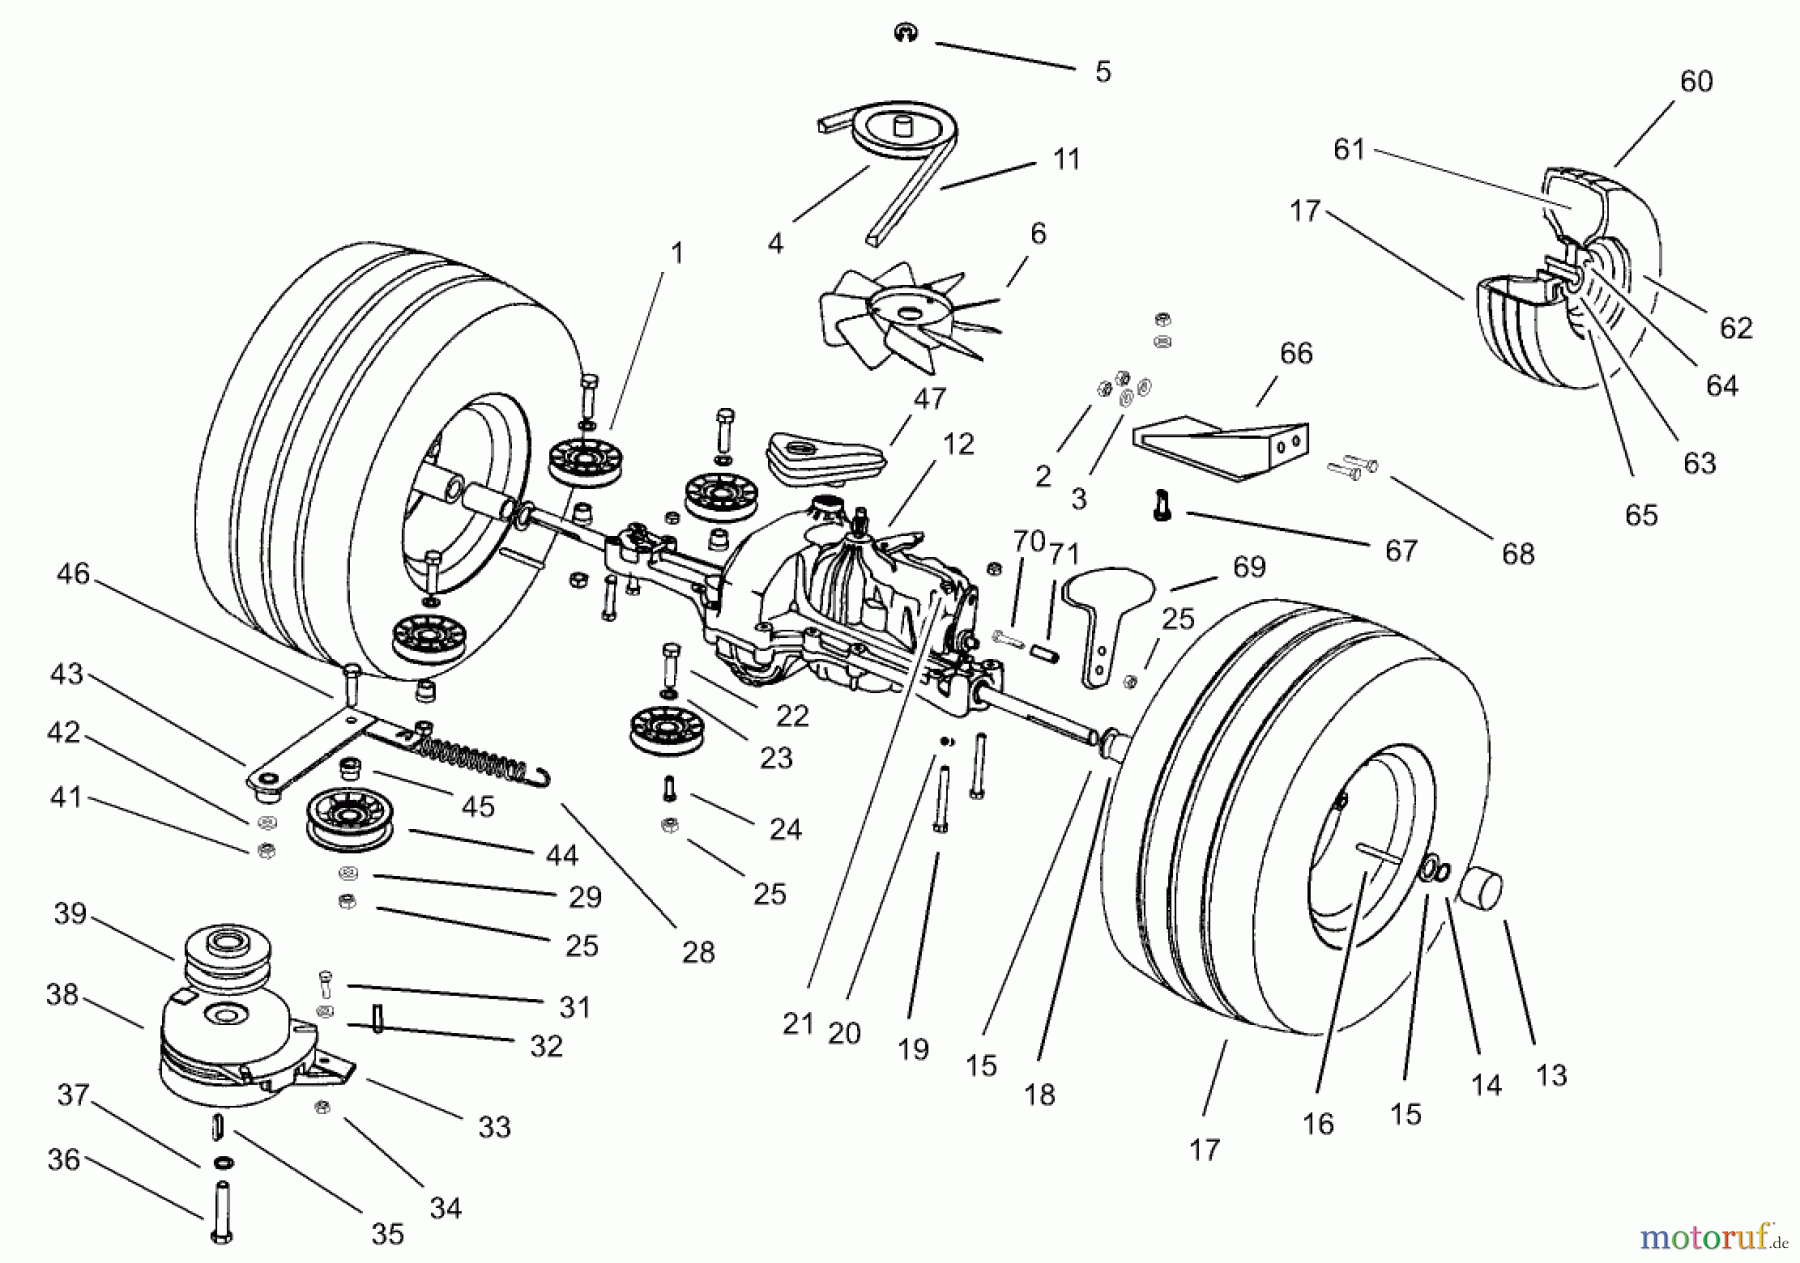  Toro Neu Mowers, Lawn & Garden Tractor Seite 1 74590 (190-DH) - Toro 190-DH Lawn Tractor, 2000 (200000001-200999999) TRANSMISSION DRIVE ASSEMBLY